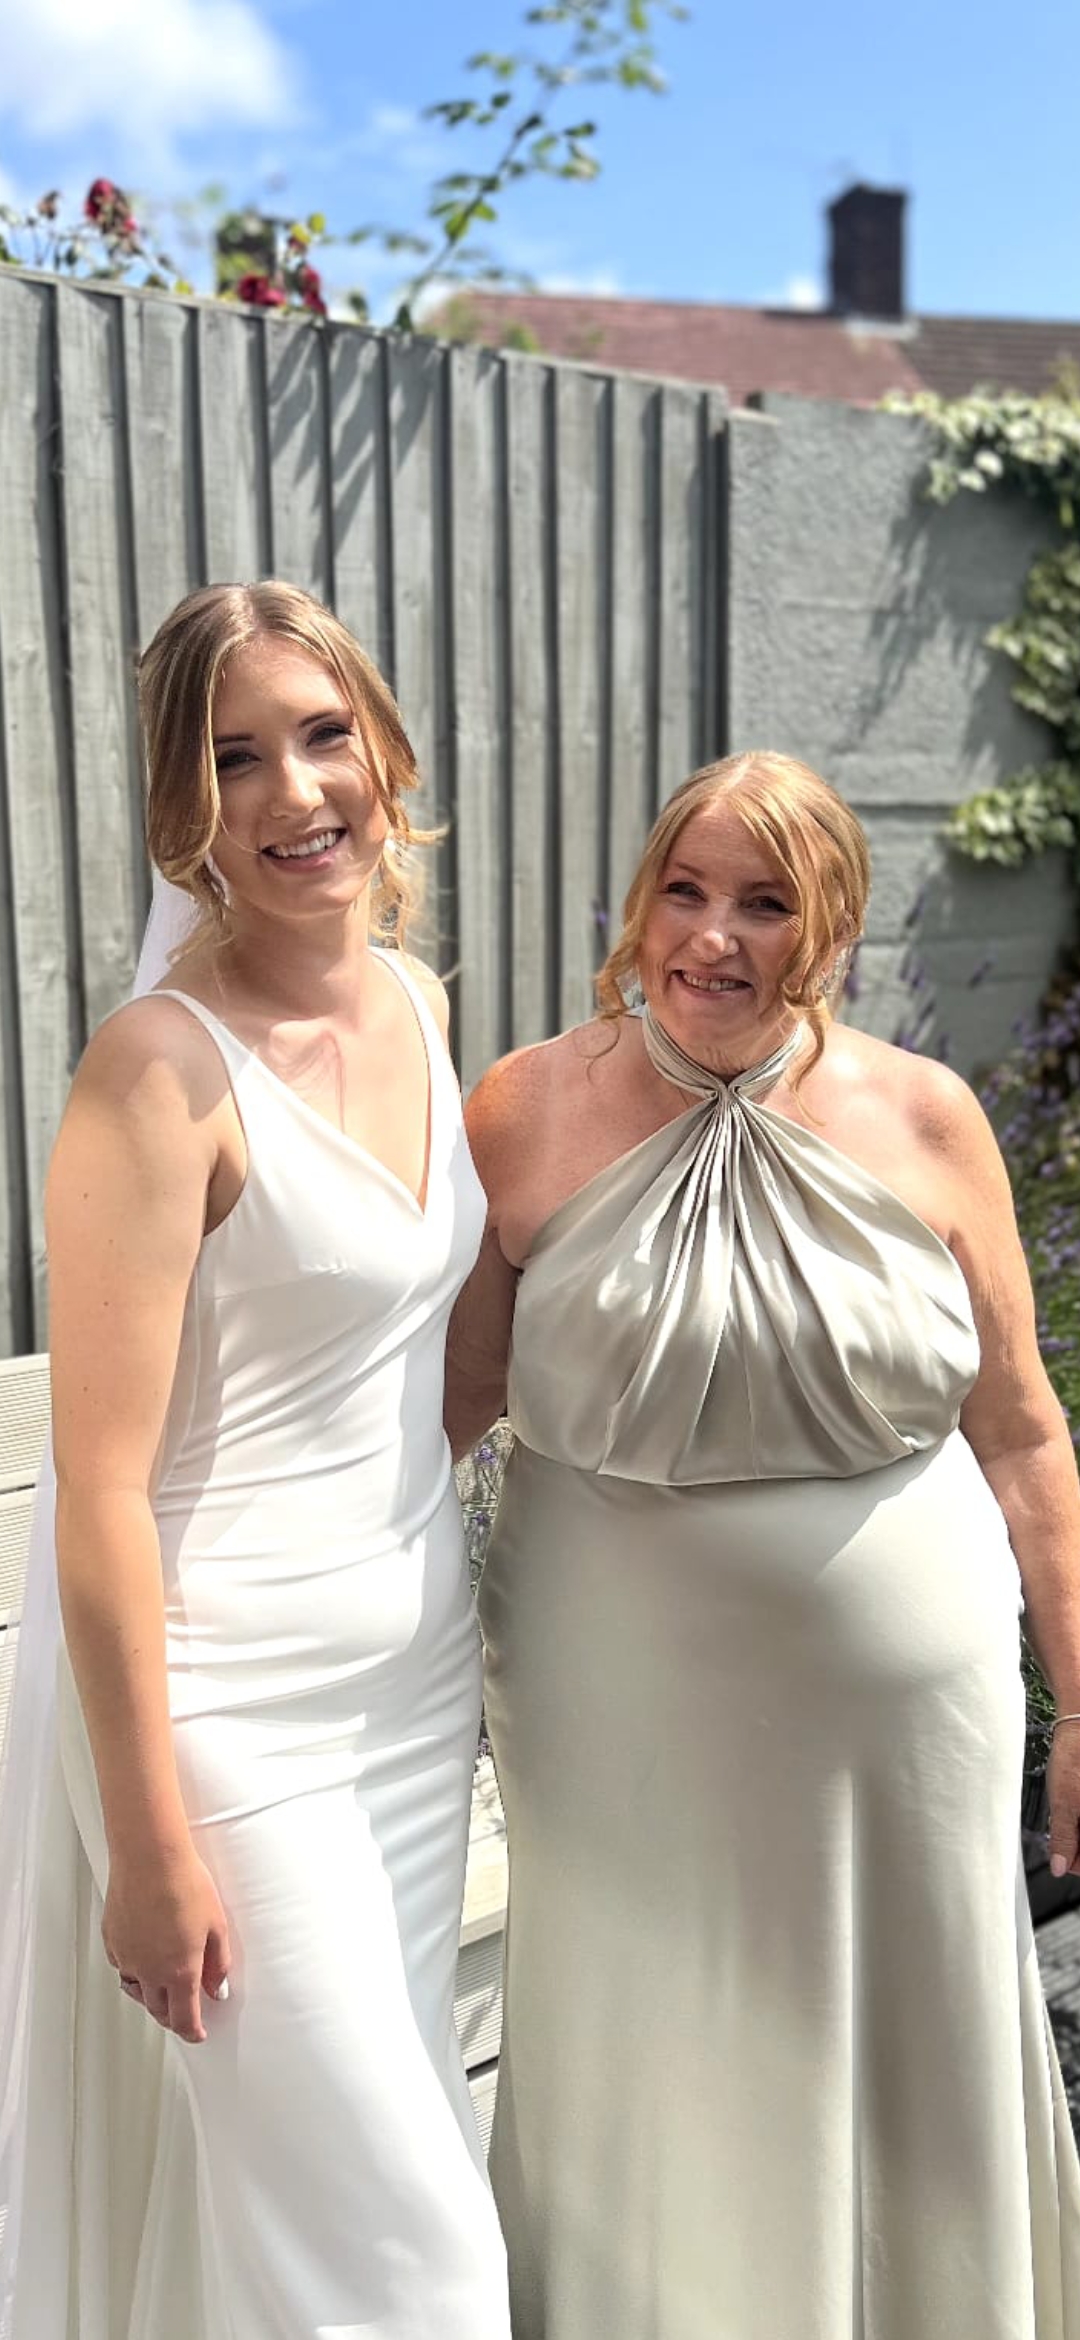 Daughter and mother in wedding attire